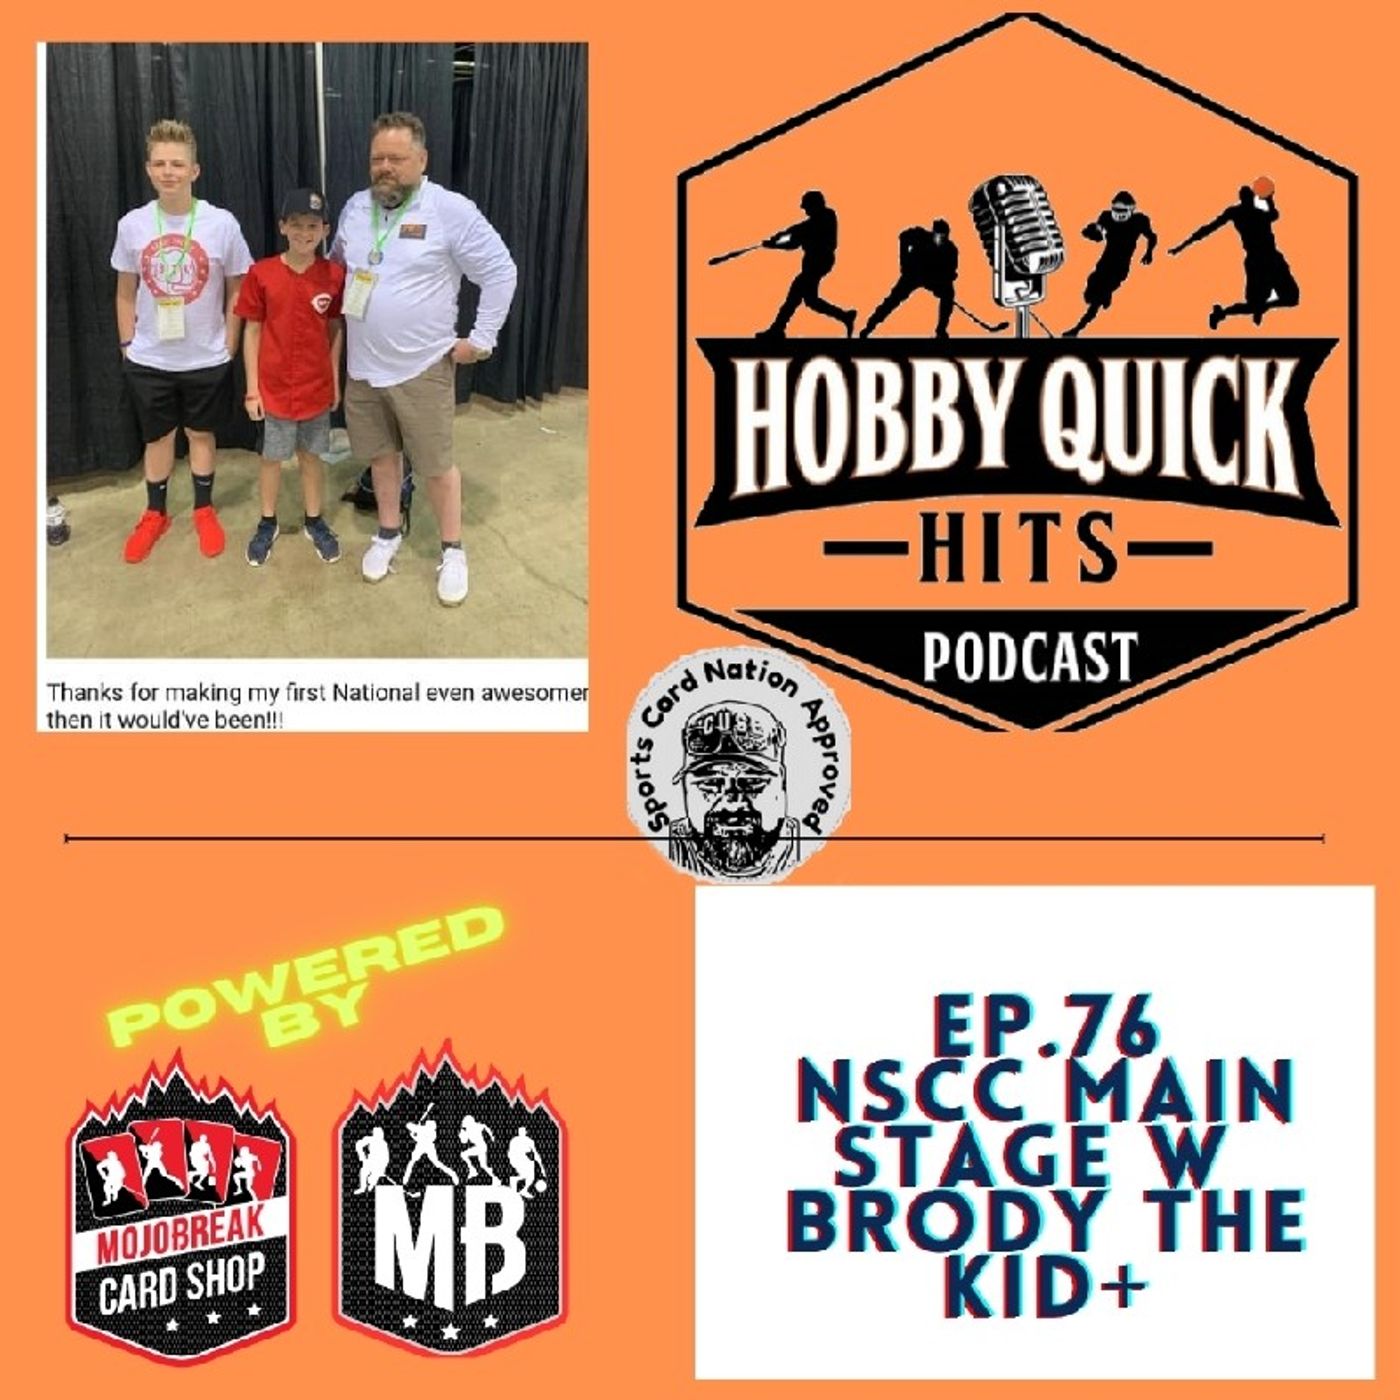 Hobby Quick Hits Ep.76 Live from the NSCC Main Stage w/Brody the Kid Image